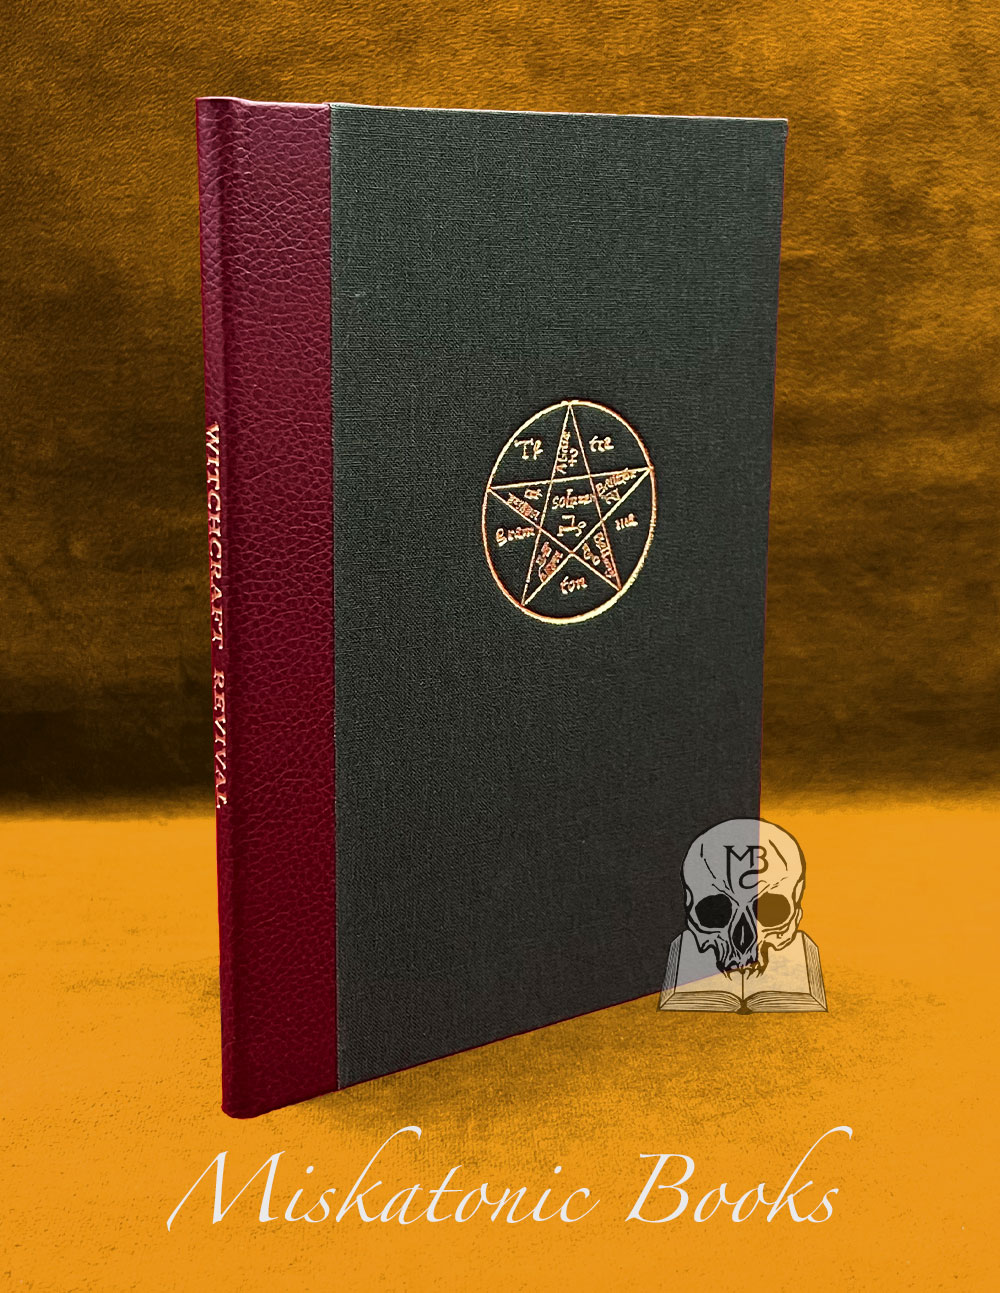 WITCHCRAFT REVIVAL by Philip Heselton (Limited Edition Hardcover Quarter Bound in Leather)